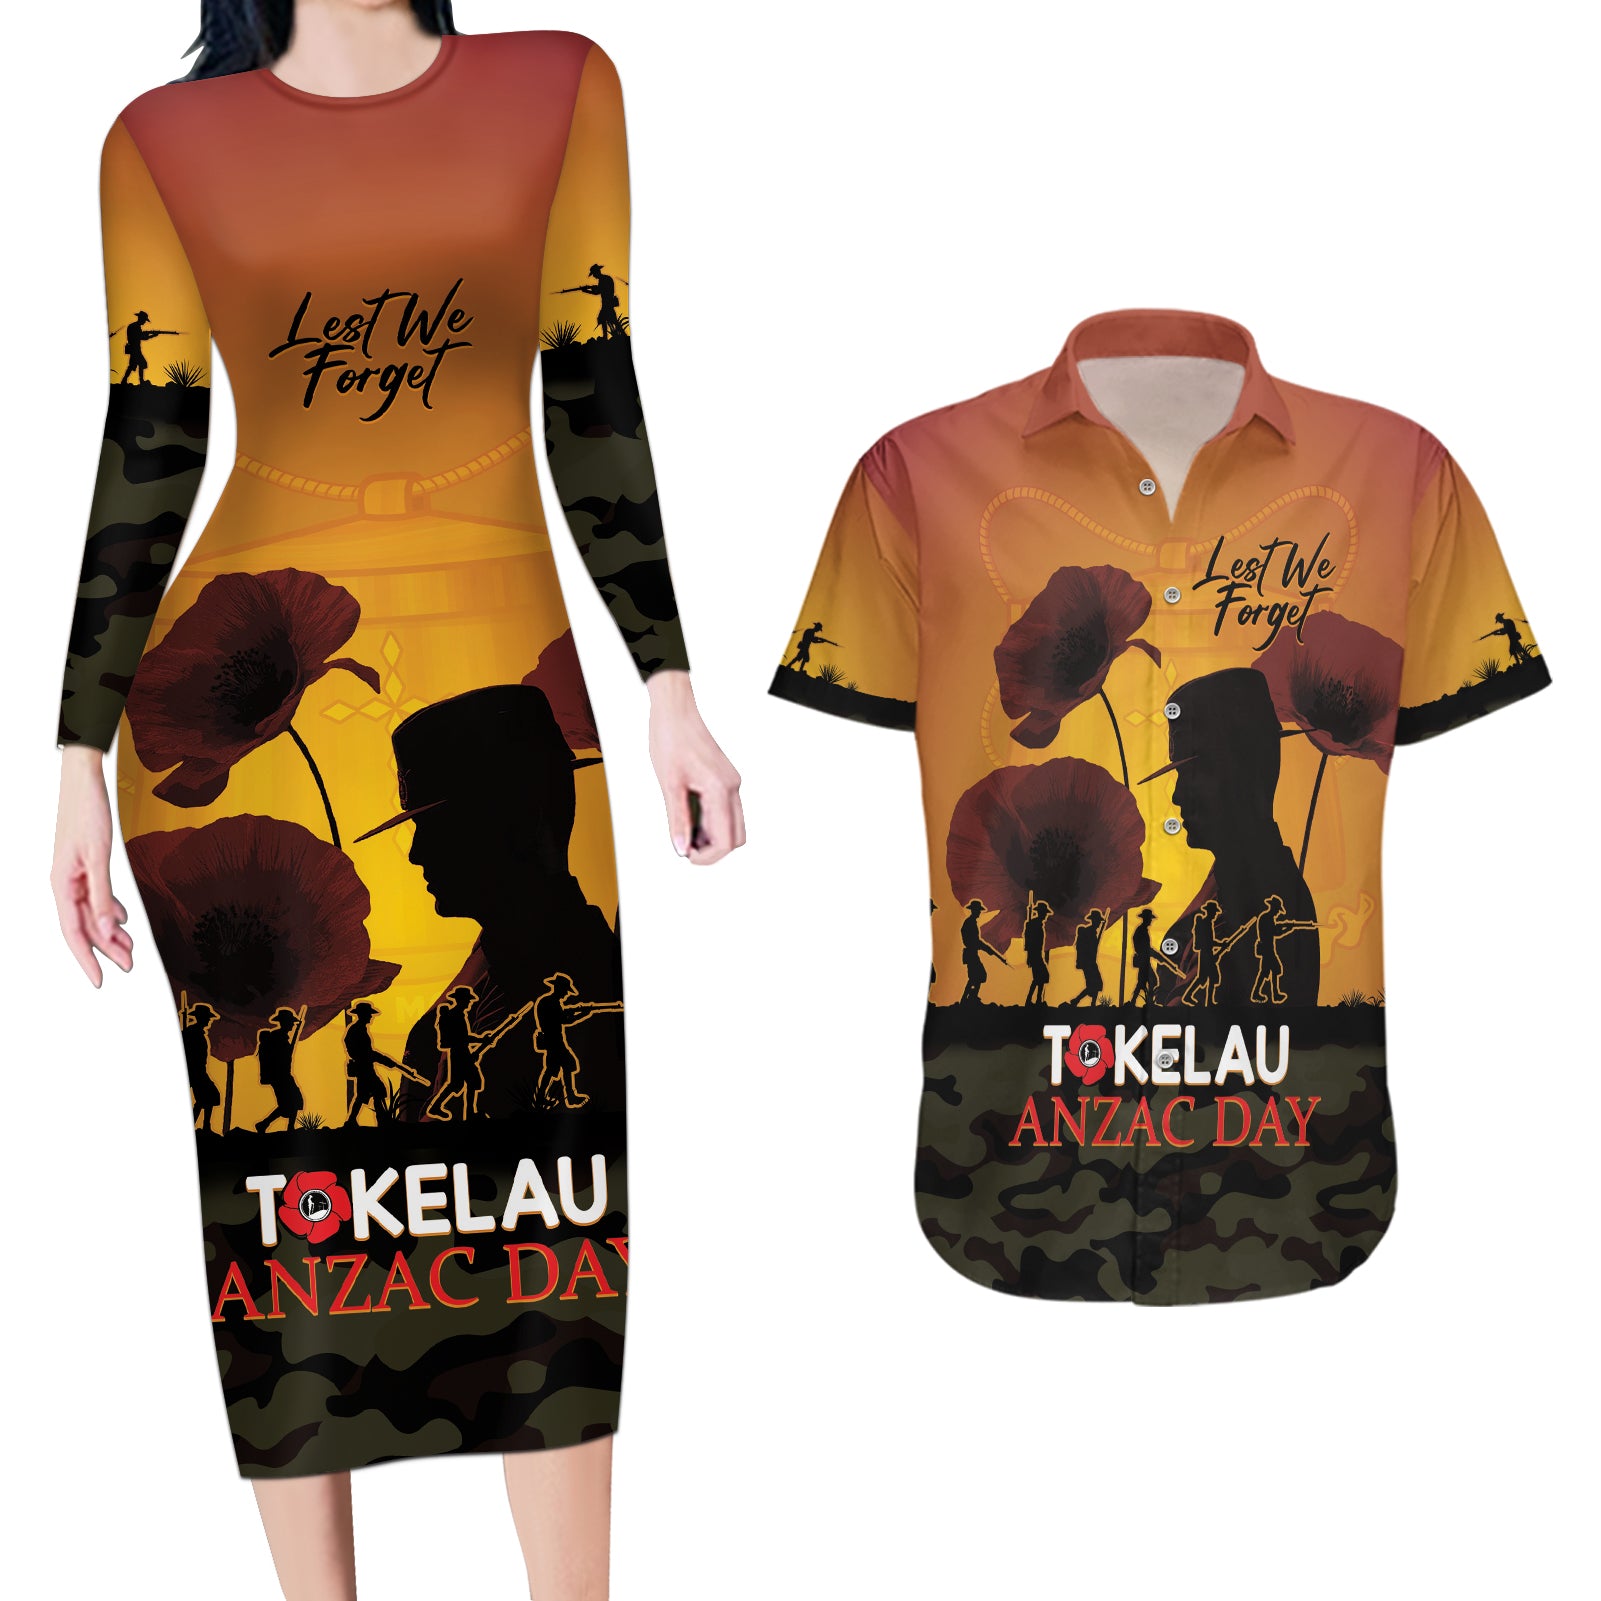 Tokelau ANZAC Day Couples Matching Long Sleeve Bodycon Dress and Hawaiian Shirt Camouflage With Poppies Lest We Forget LT14 Yellow - Polynesian Pride